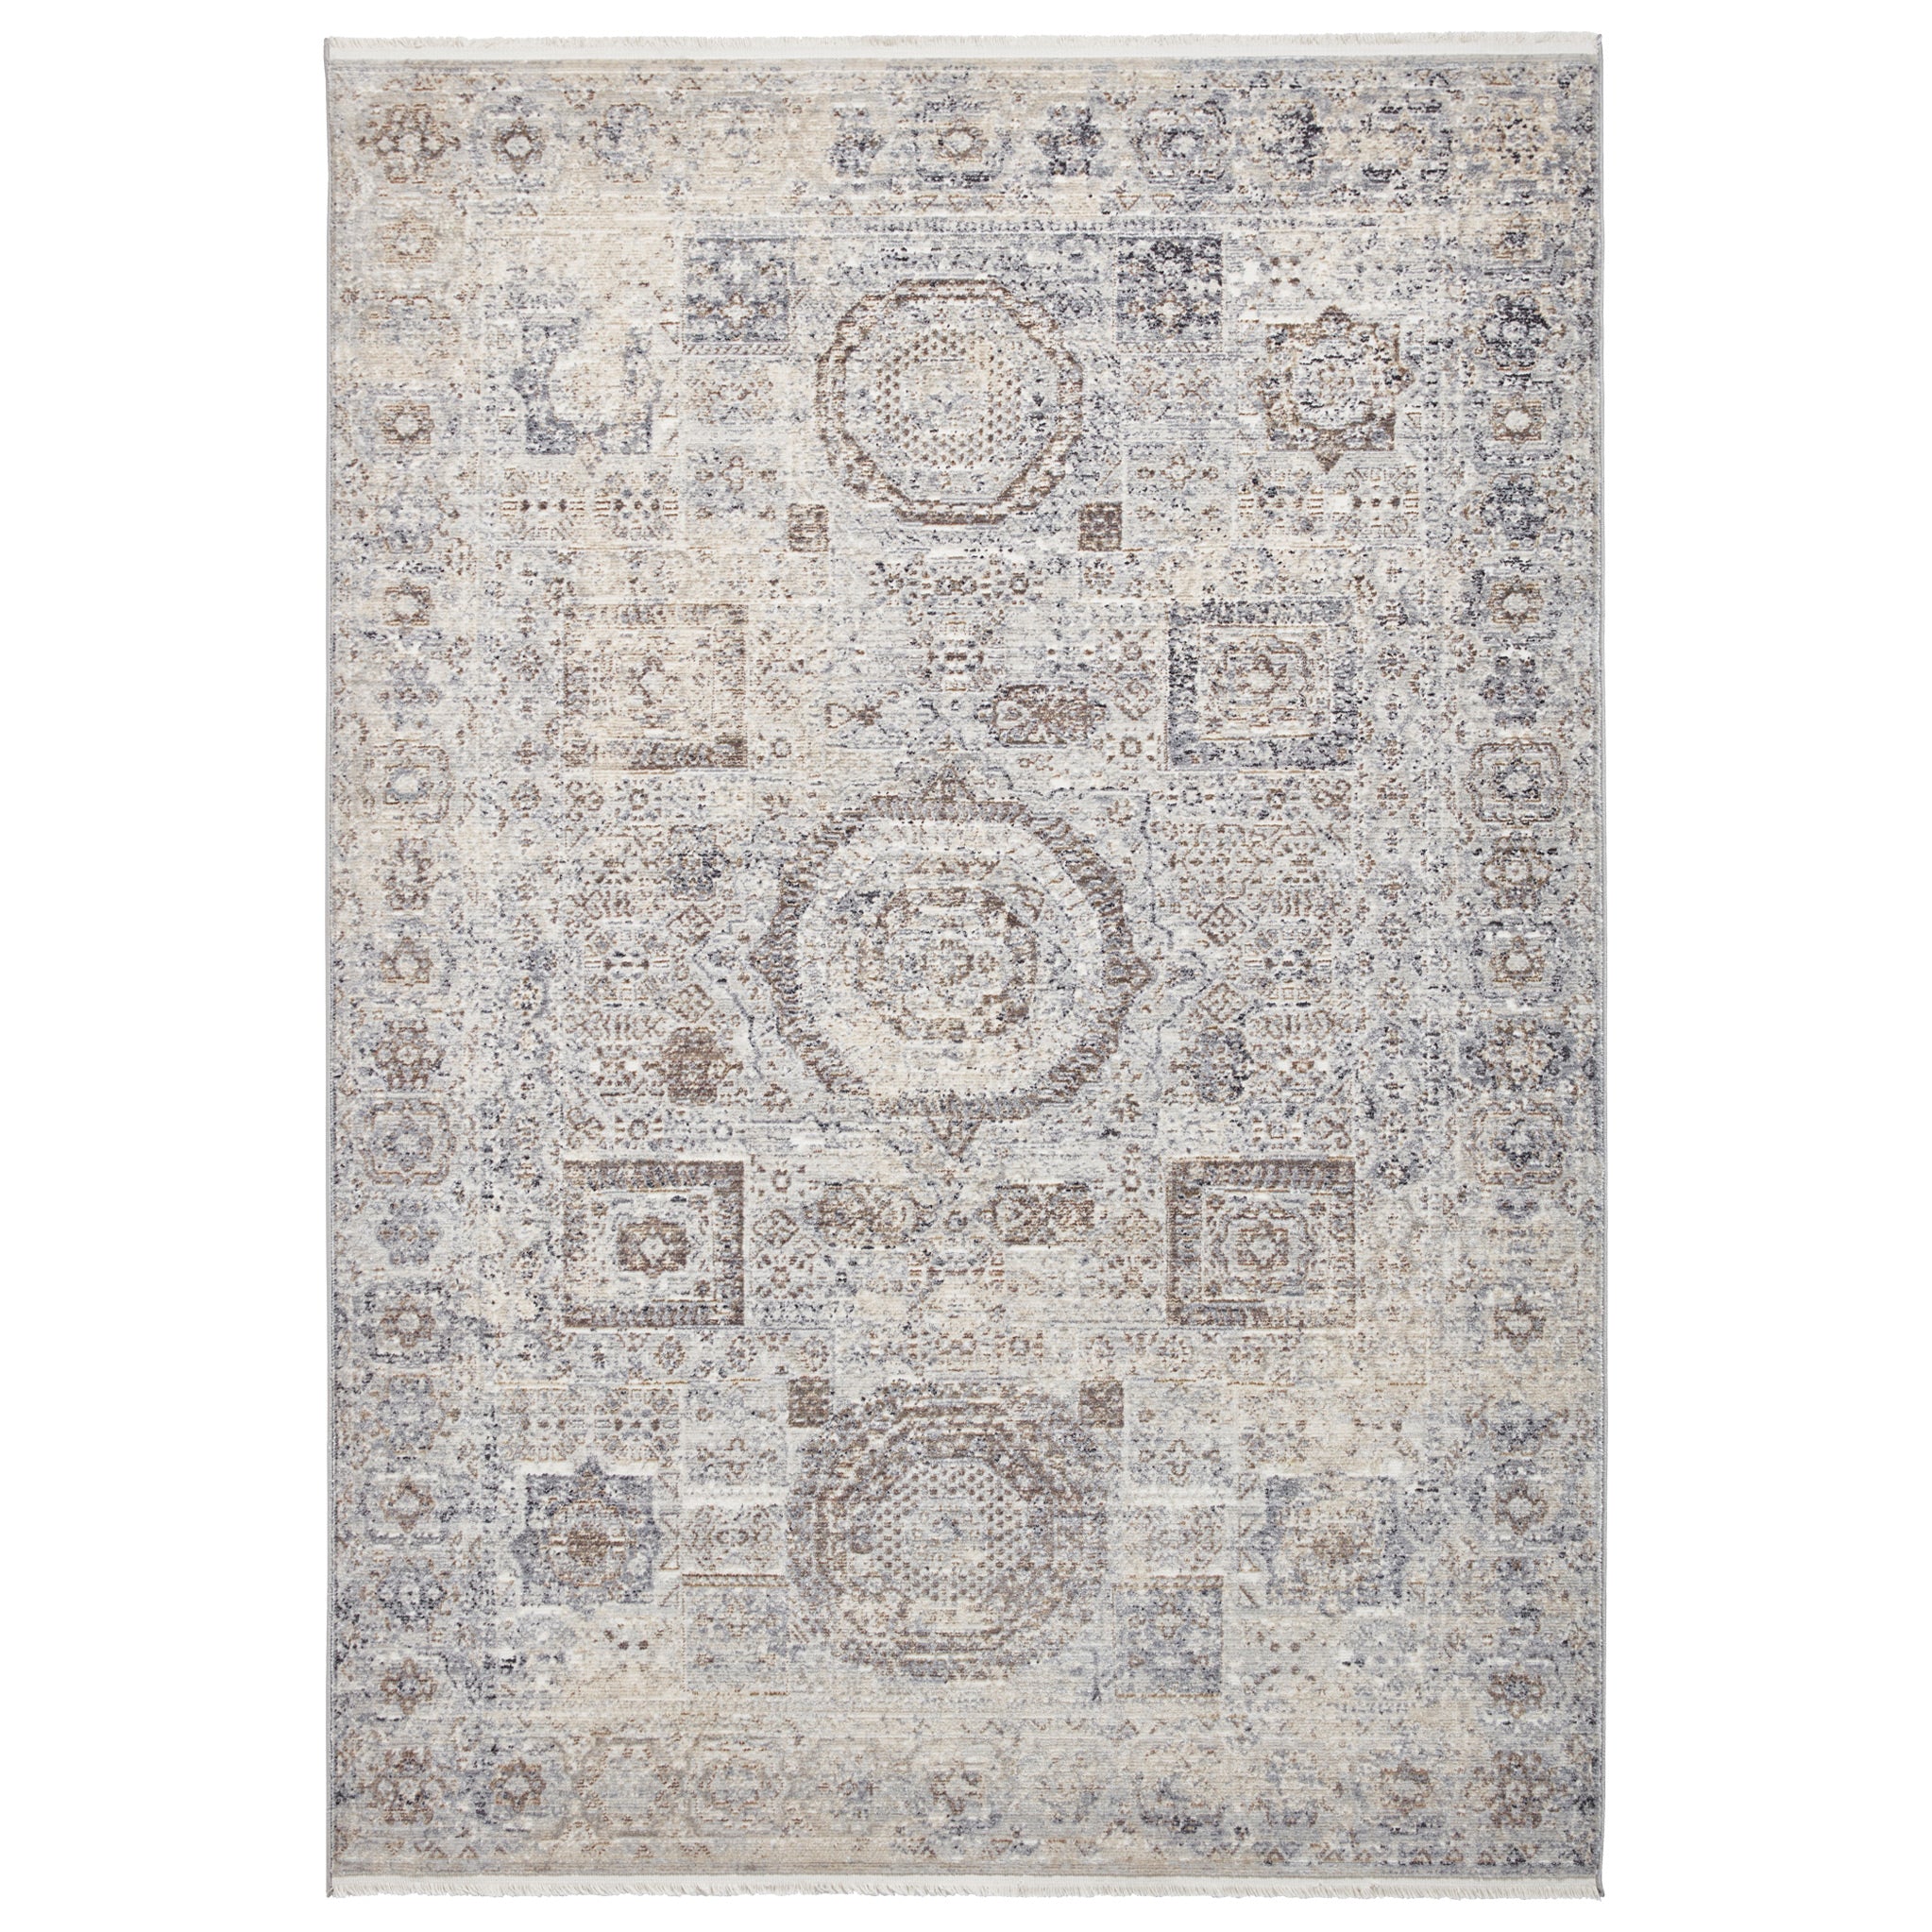 Thea Grey Moroccan Distressed Rectangular Rug For Living Room Or Bedroom